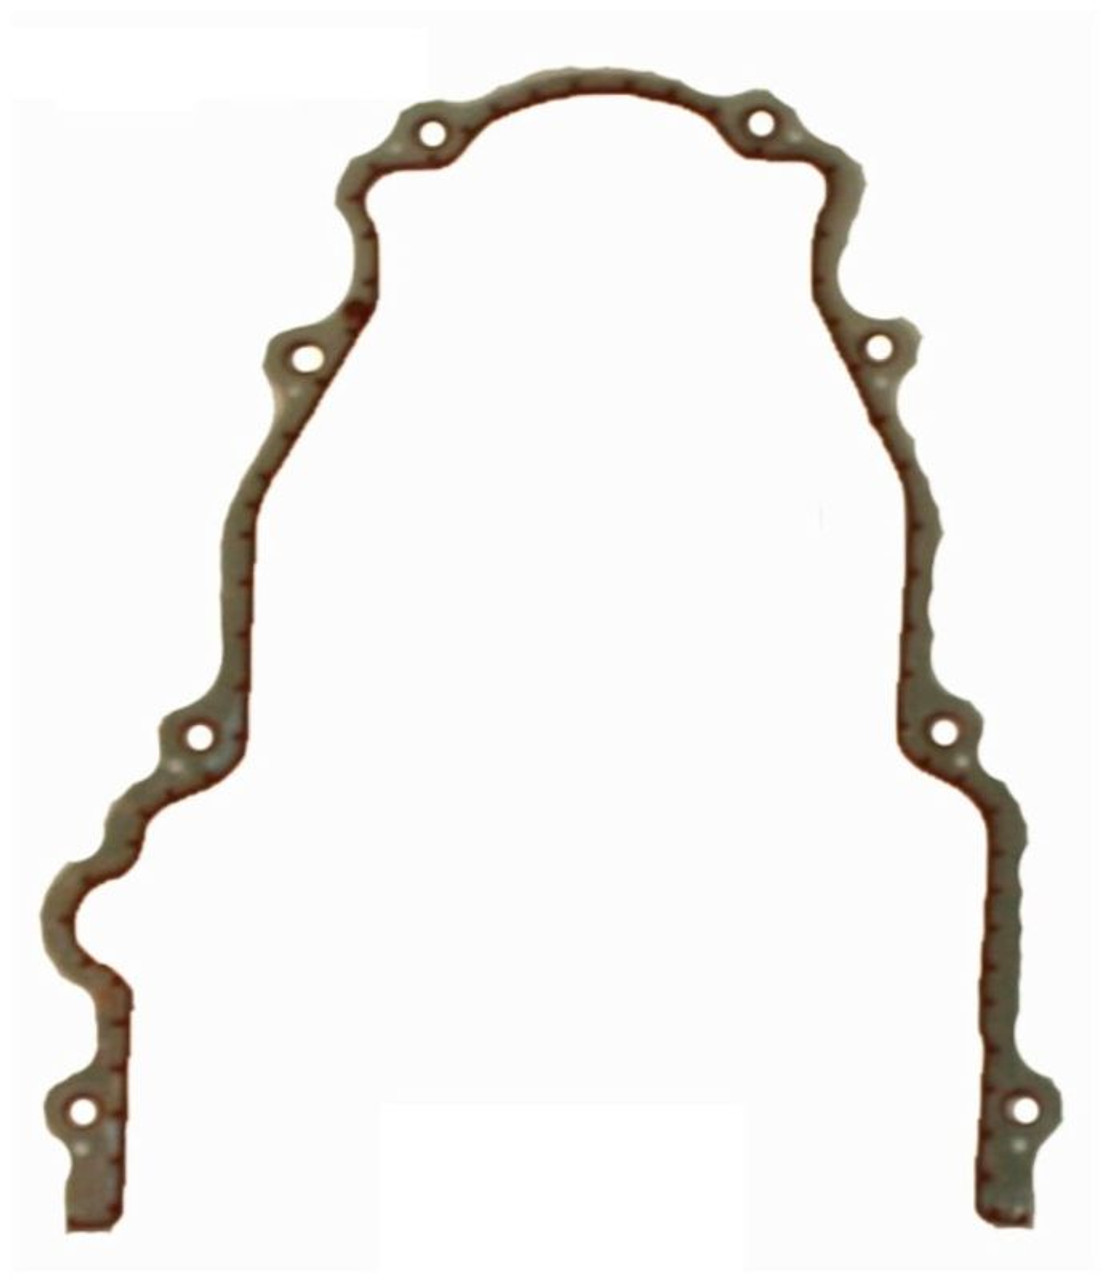 2011 Chevrolet Caprice 6.0L Engine Timing Cover Gasket TCG293-A -704